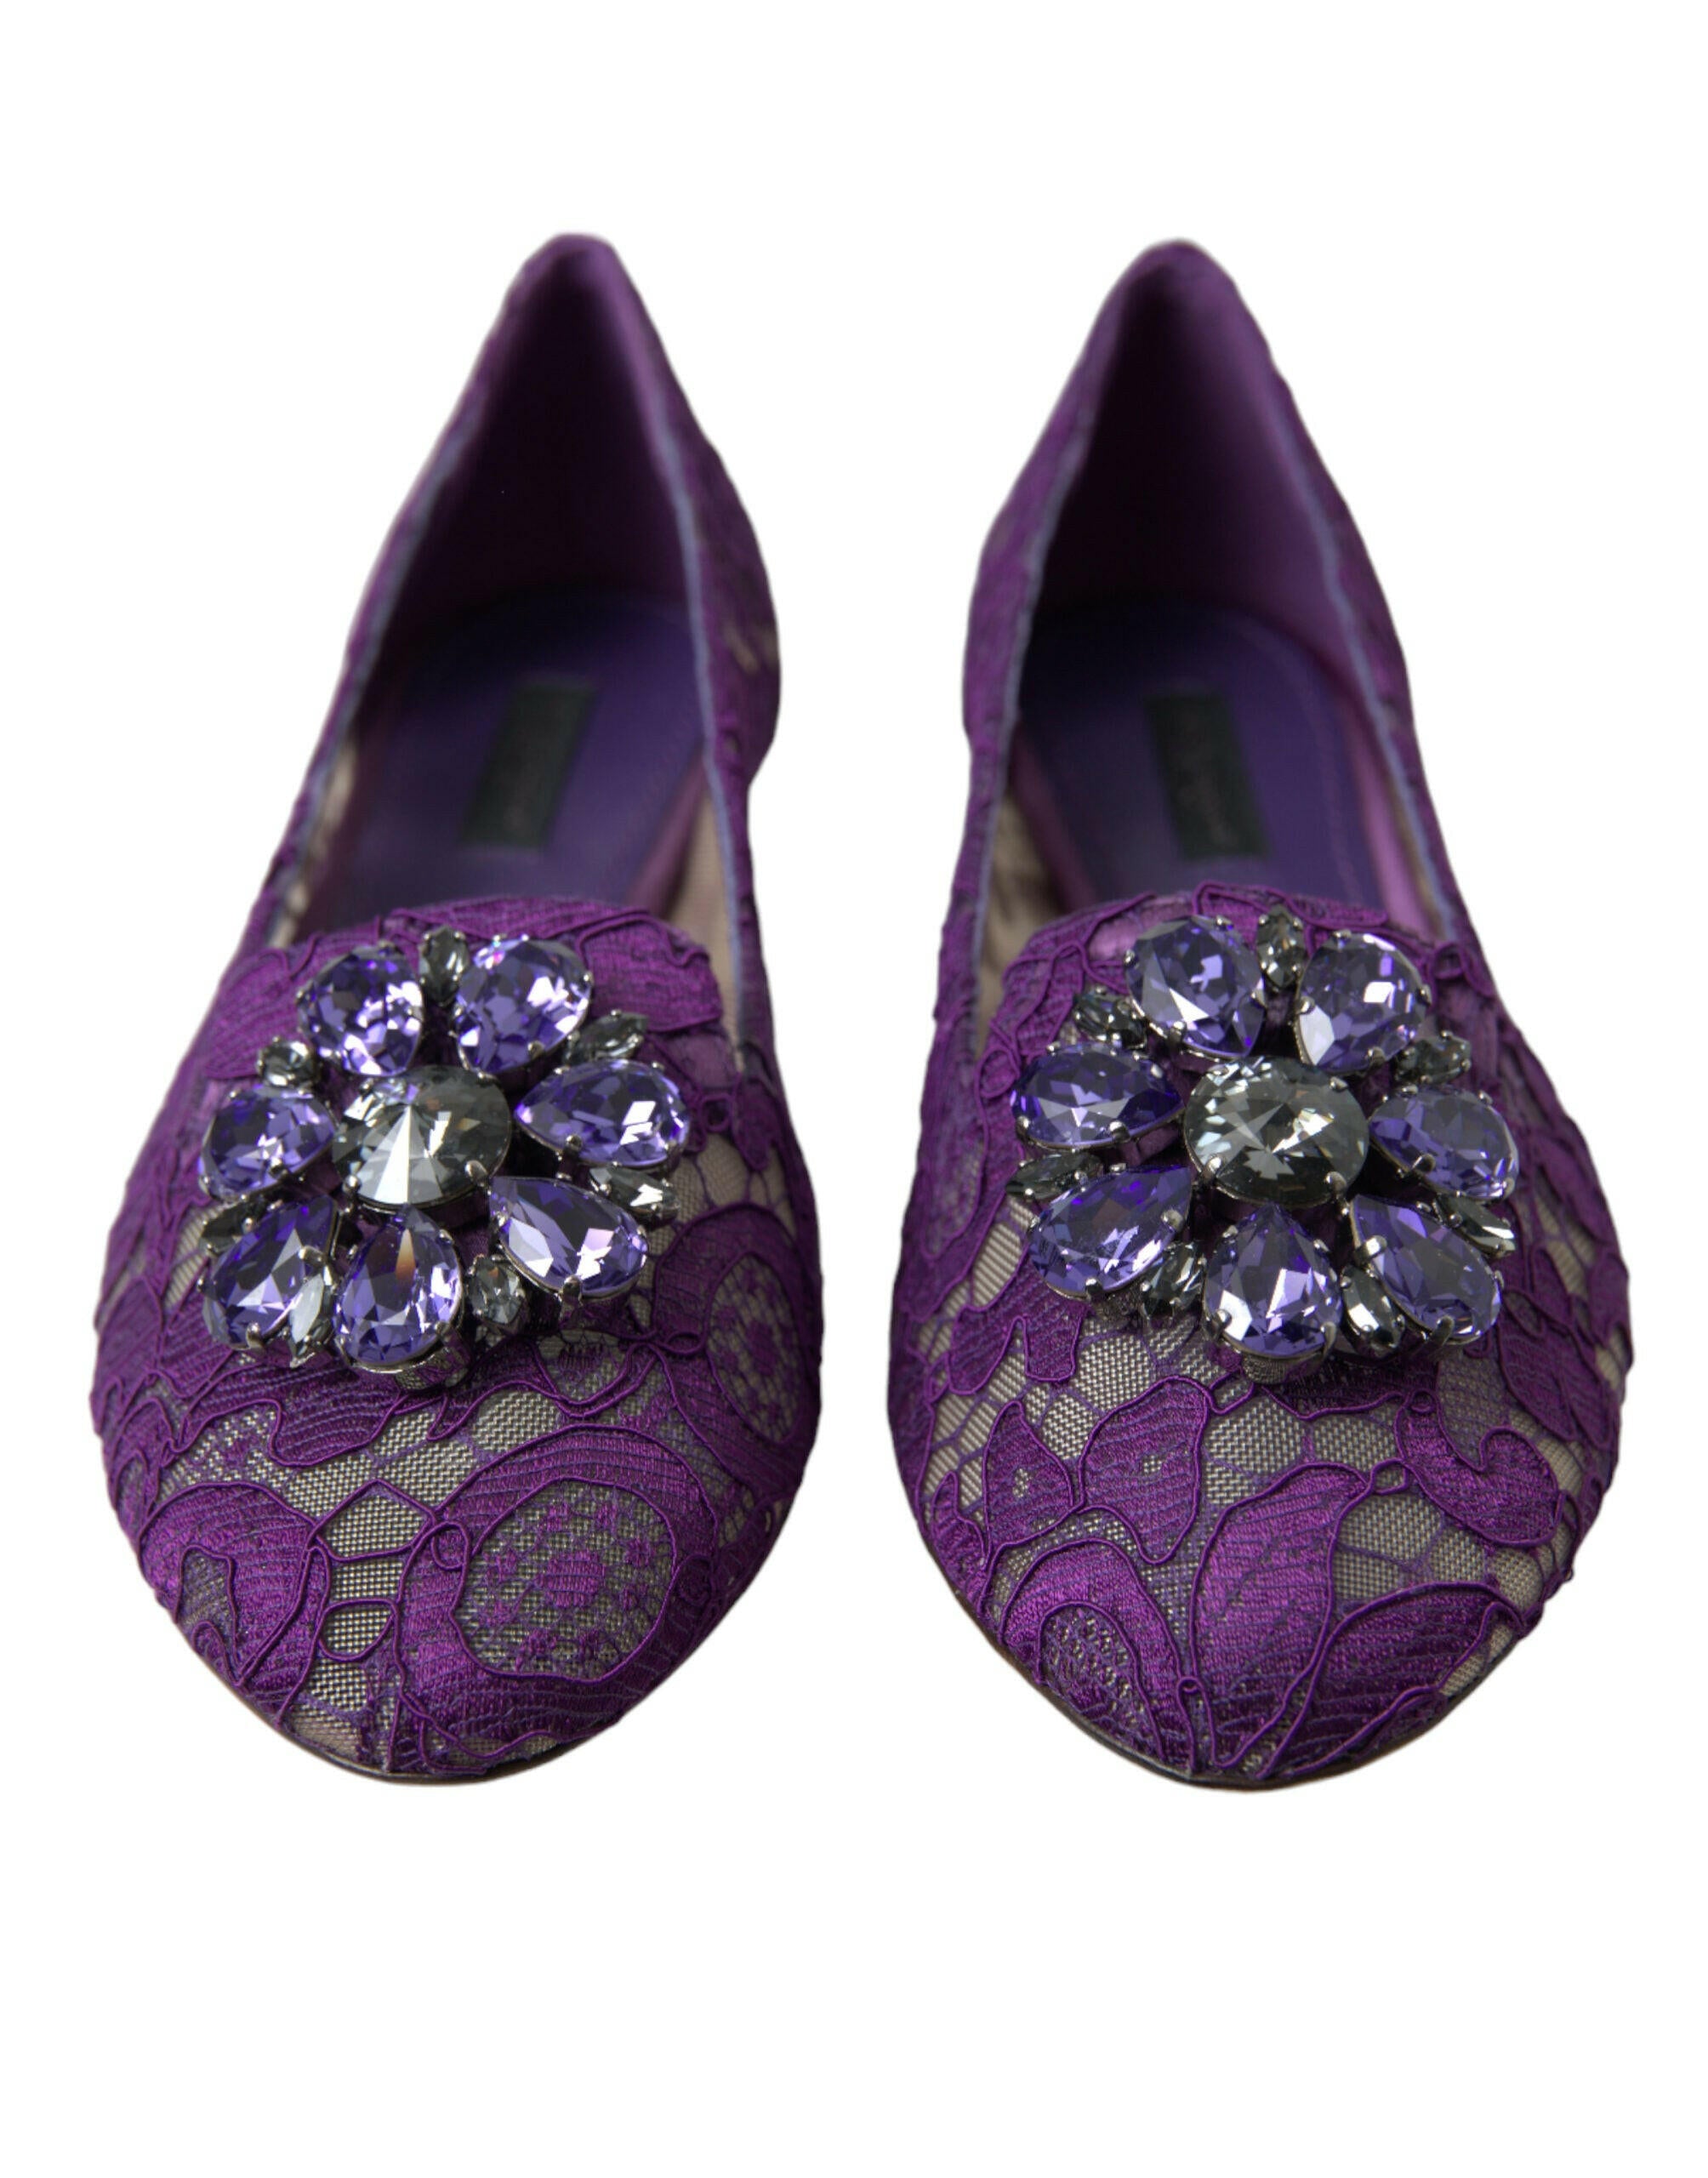 Dolce & Gabbana Purple Vally Taormina Lace Crystals Flats Shoes - GENUINE AUTHENTIC BRAND LLC  